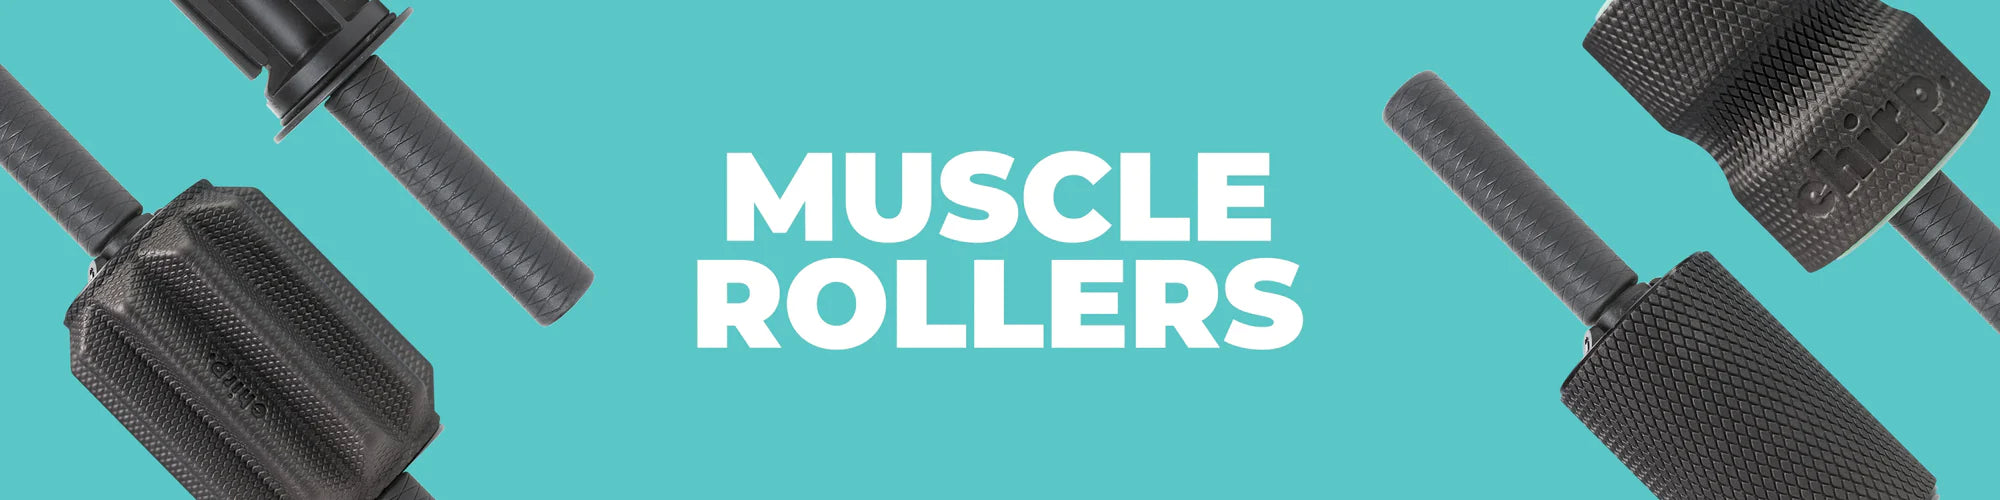 Muscle Rollers